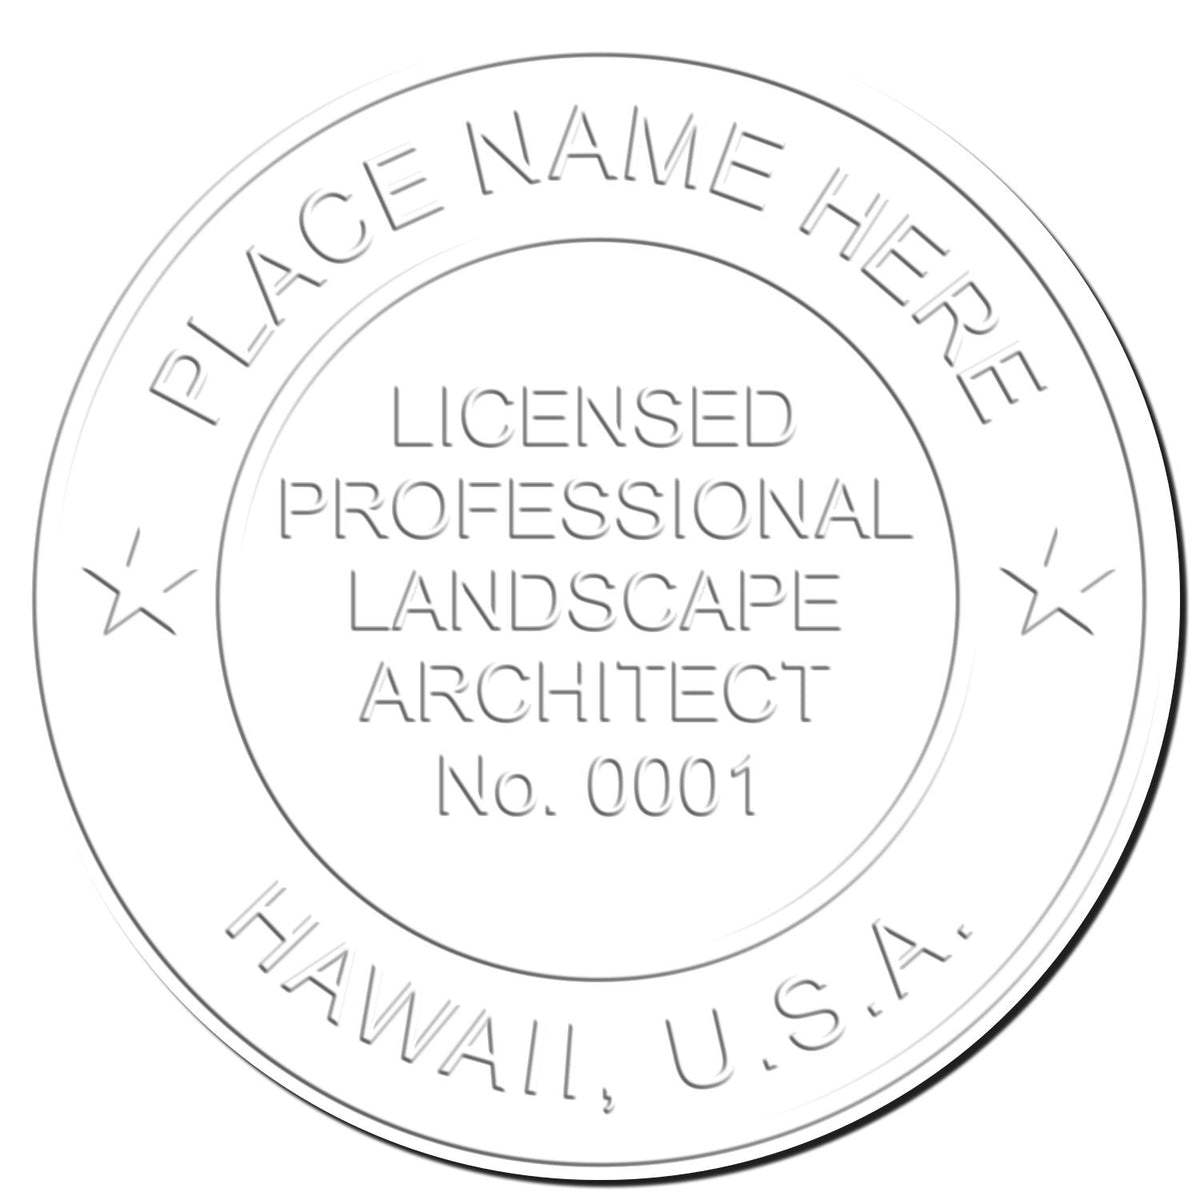 This paper is stamped with a sample imprint of the Gift Hawaii Landscape Architect Seal, signifying its quality and reliability.